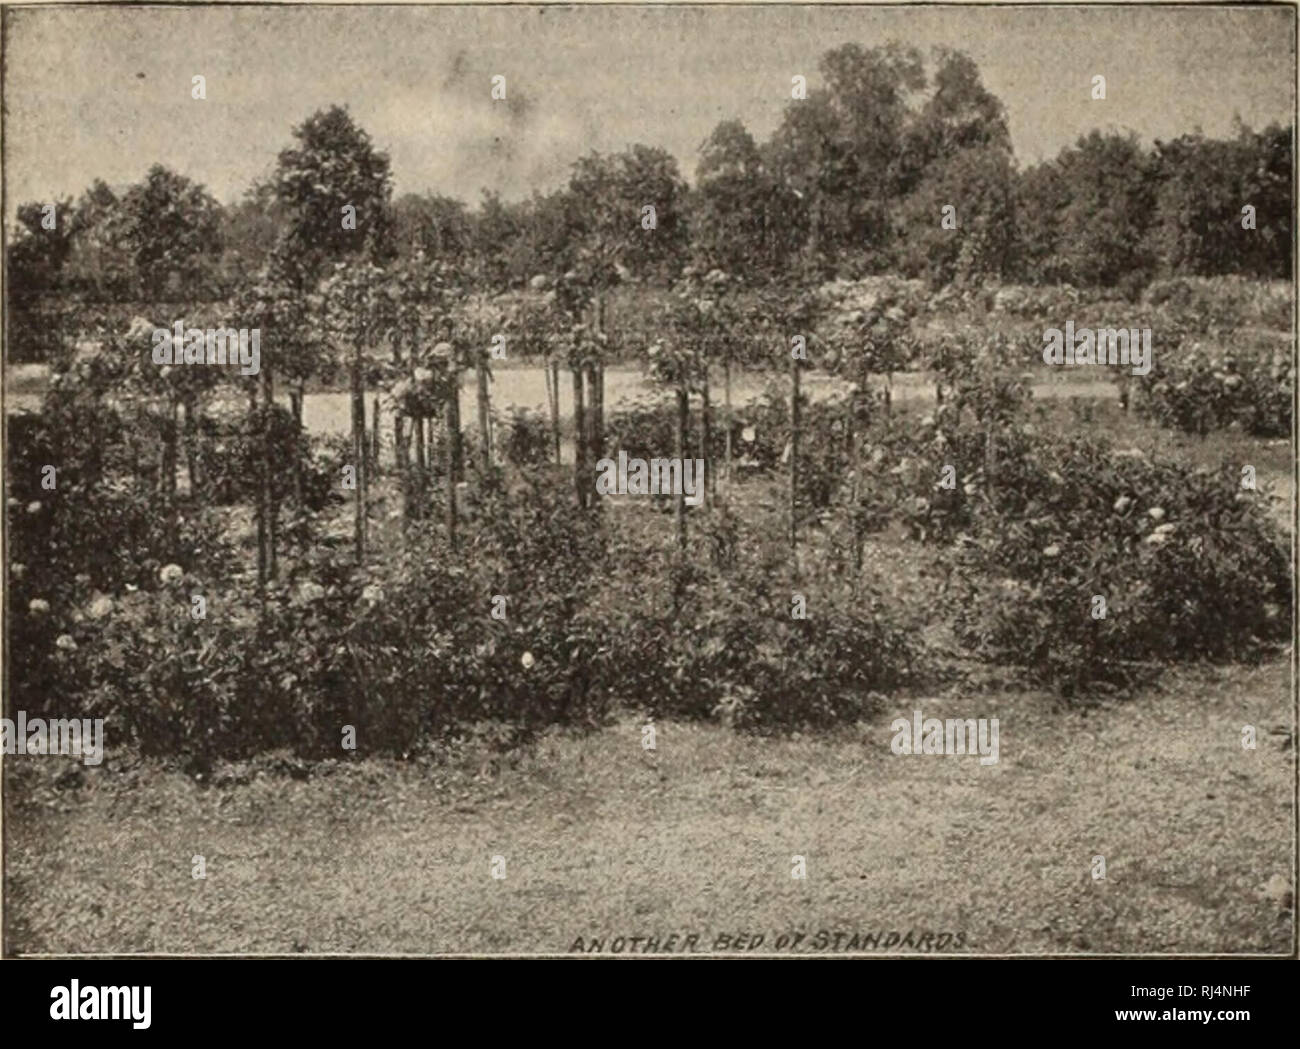 . Choice hardy trees and plants / F.W. Kelsey Nursery Company.. Nursery Catalogue. 48 Fred'k W. Kklsey, 150 Broadway, Nt:w York. CHOICE ROSES.. • iiTliTliftTiiMitfii 1A ,DARD Roses. For a number of years Roses have been one of my leading specialties. Of the hundreds of varieties, those noted below are selected to include the very best. There is no object or satisfaction in growing poor Roses of any kind, and the present low prices for really fine plants of the choicest vari- eties brings them within the reach of all. The Hybrid Perpetuai. Roses and Rosa Rugosa are as a rule the most satis- fac Stock Photo